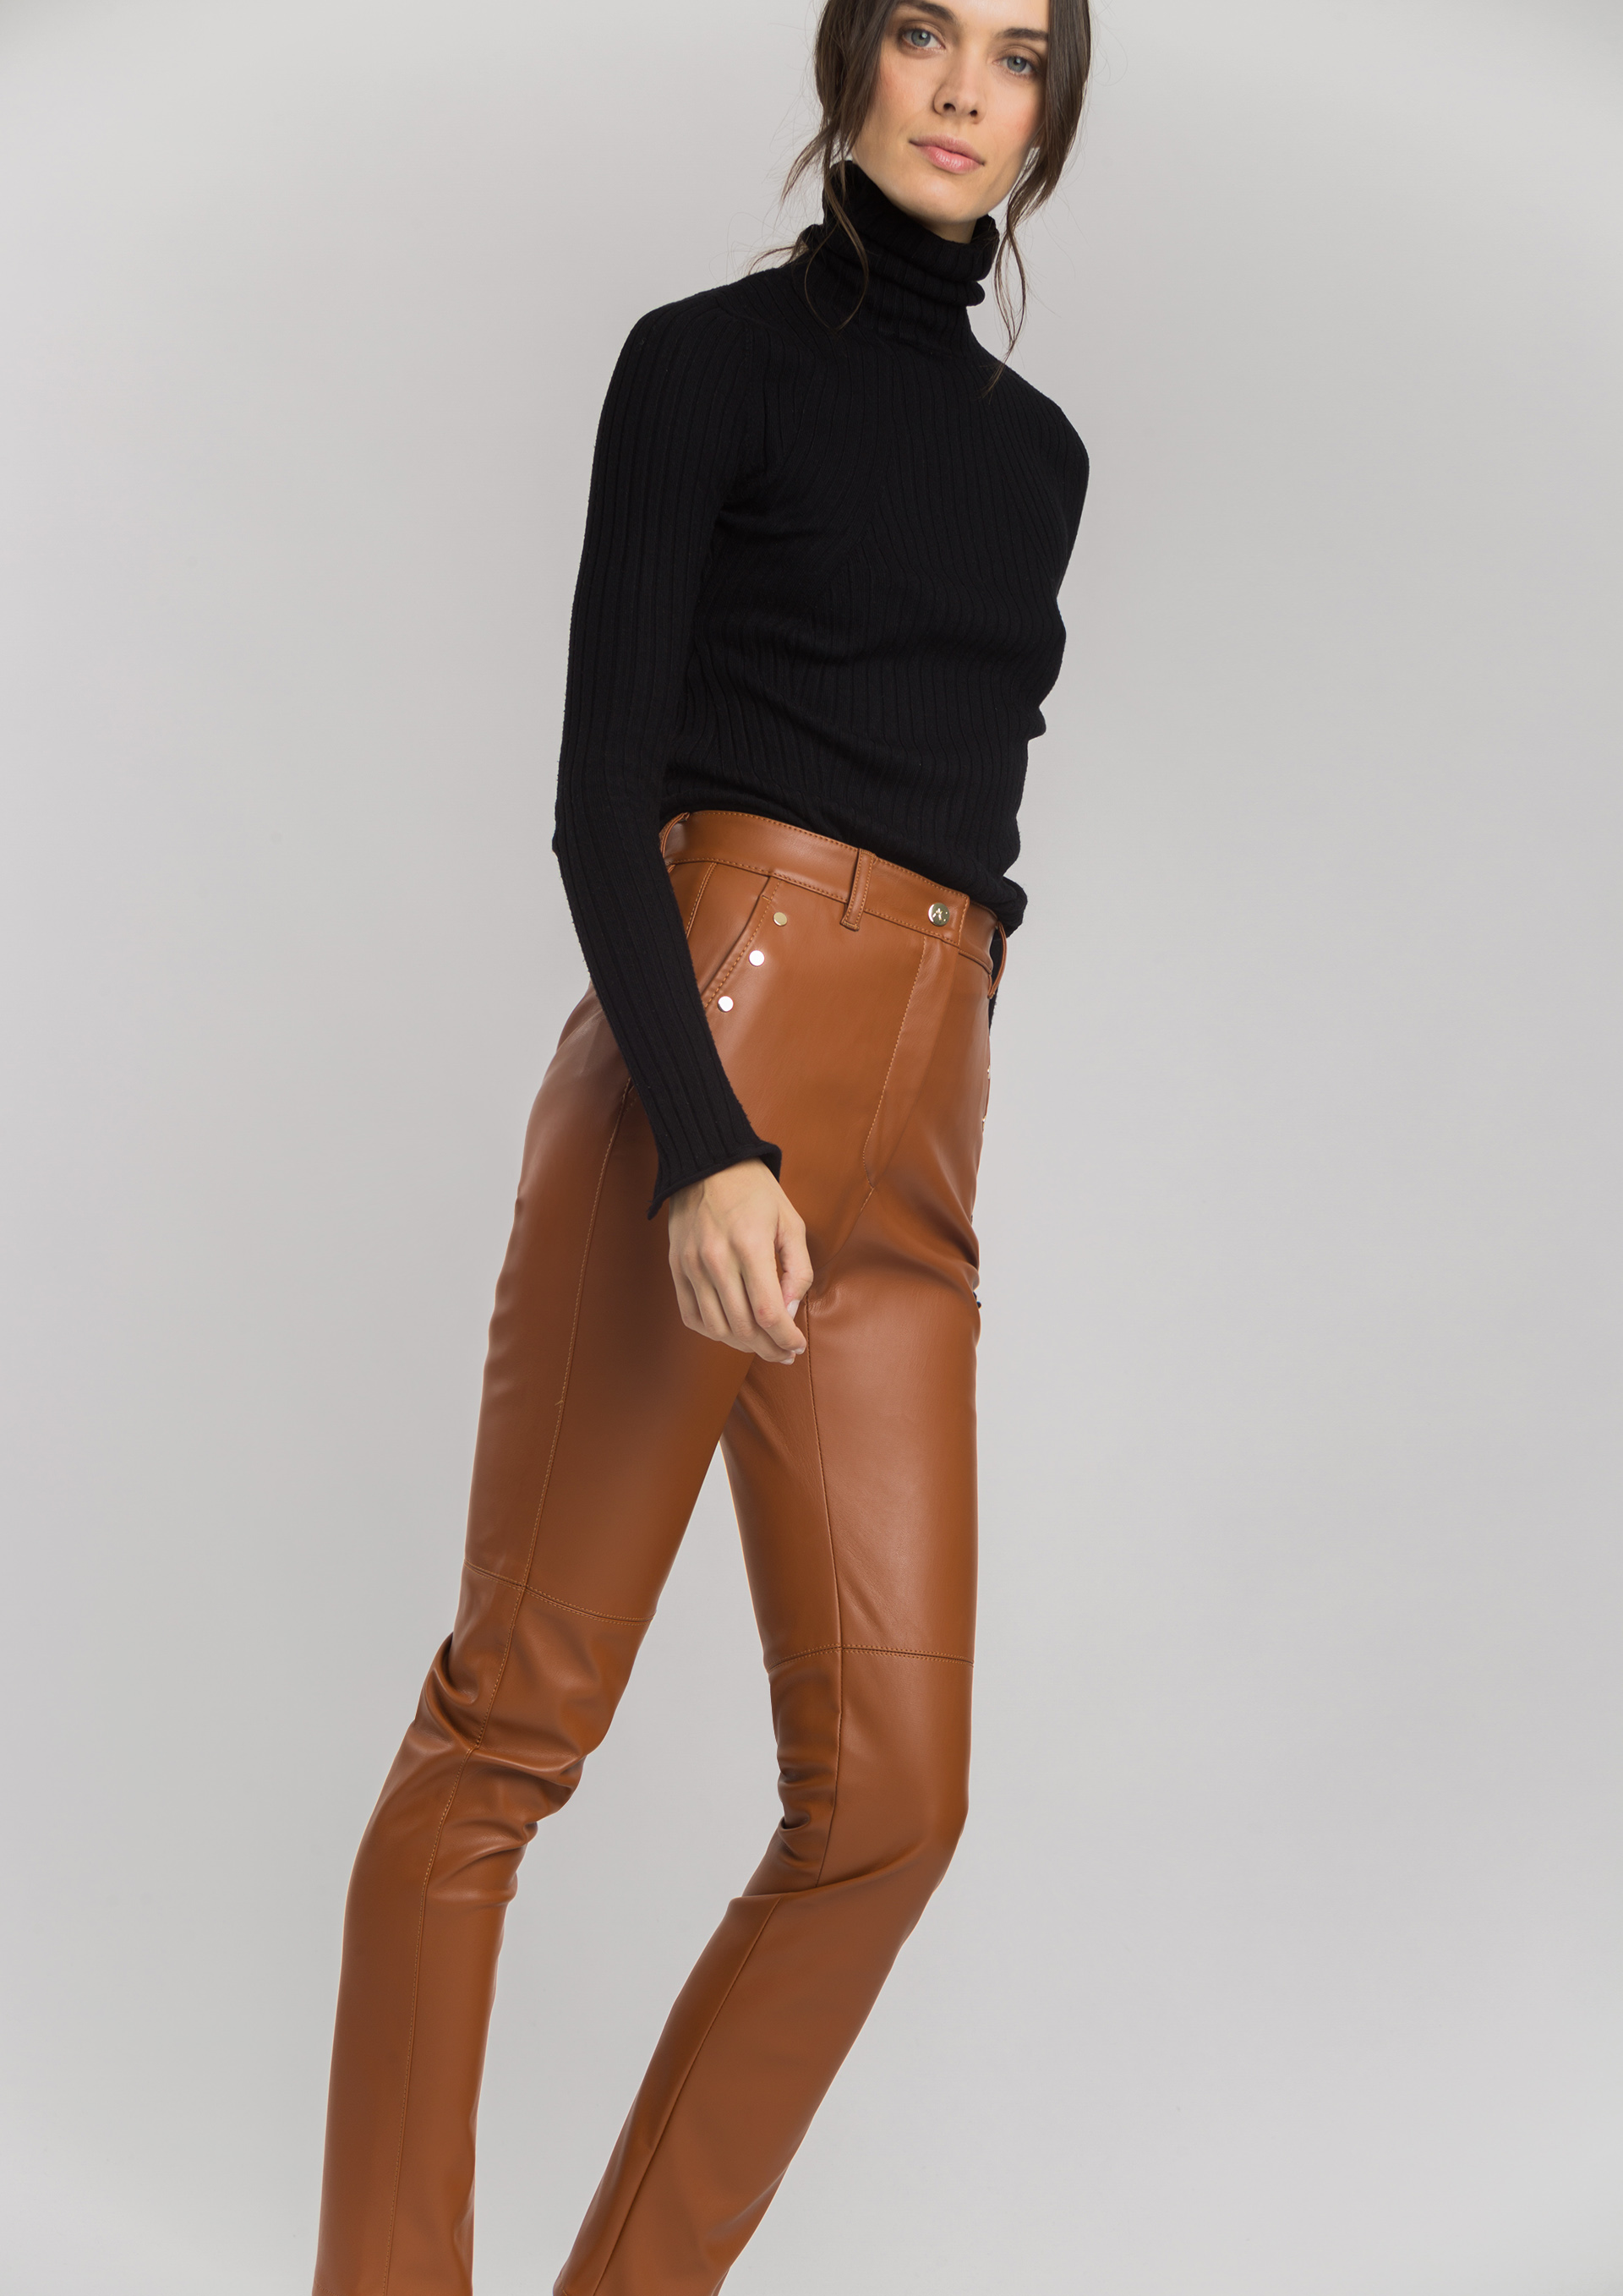 Leather effect trousers in camel.